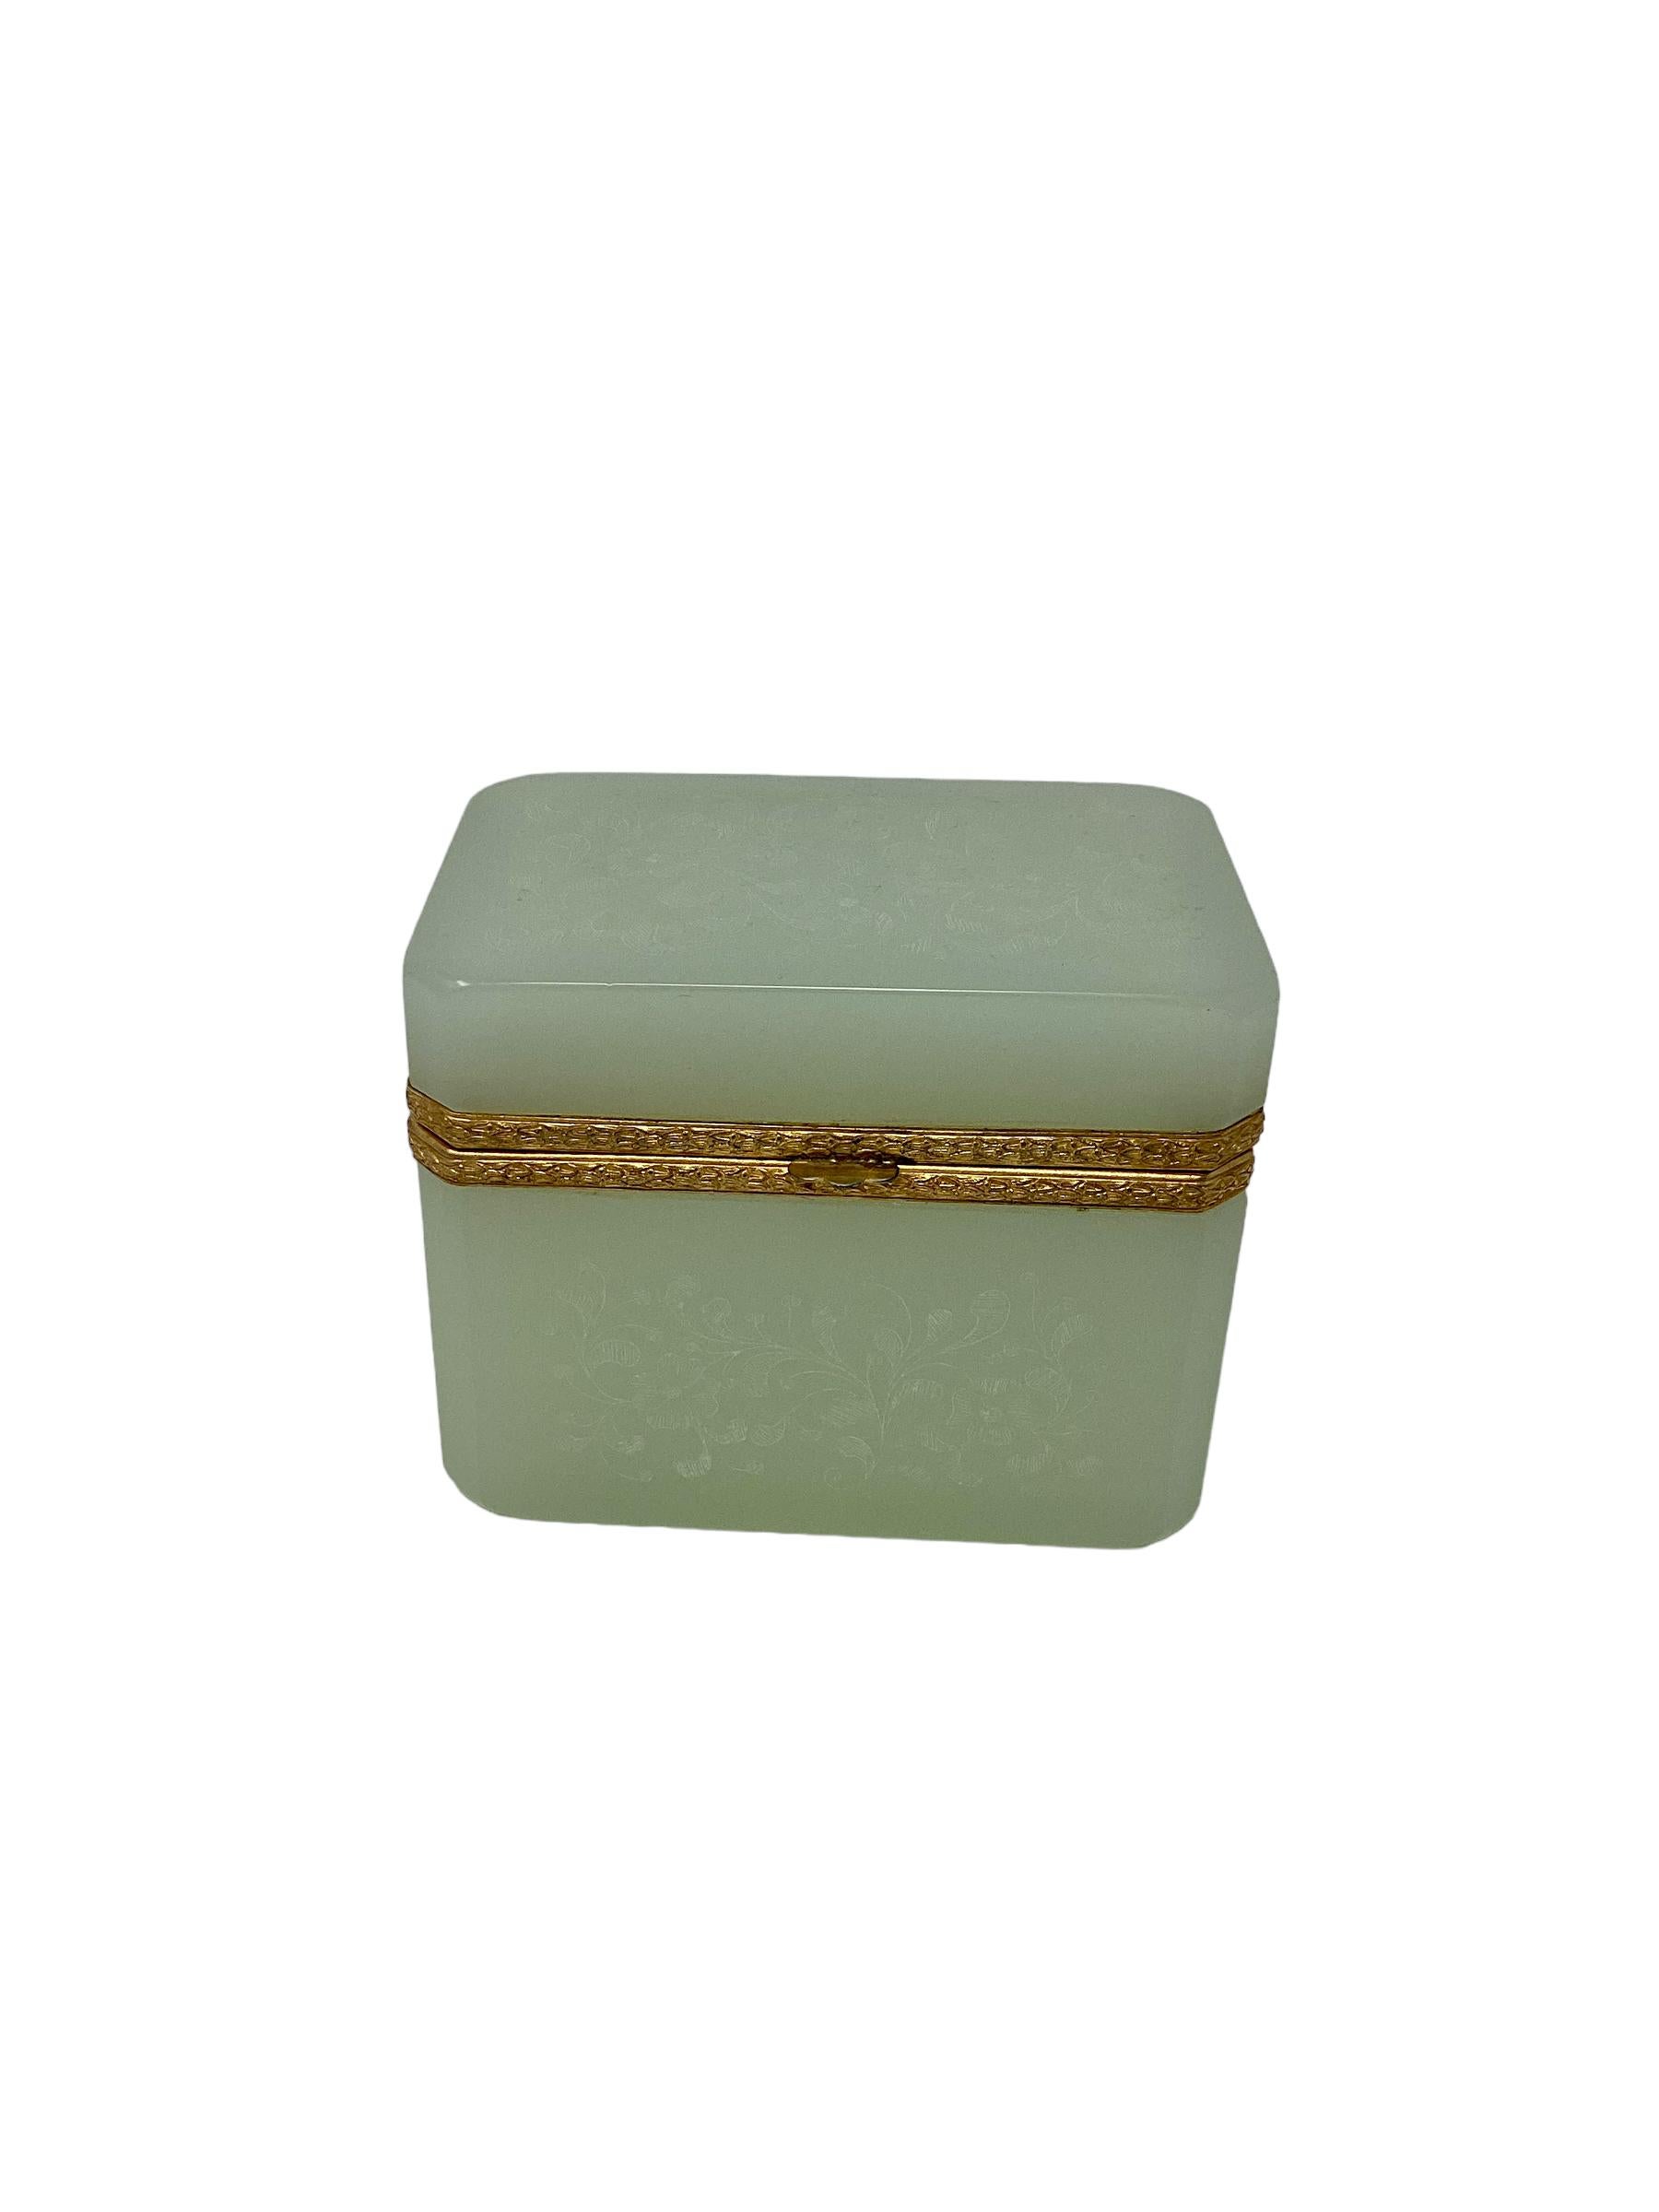 Antique French Green Opaline Box with Etched Decoration. Pale green opaline glass, with scrolling etched decoration on the glass, and gilt bronze mounts.